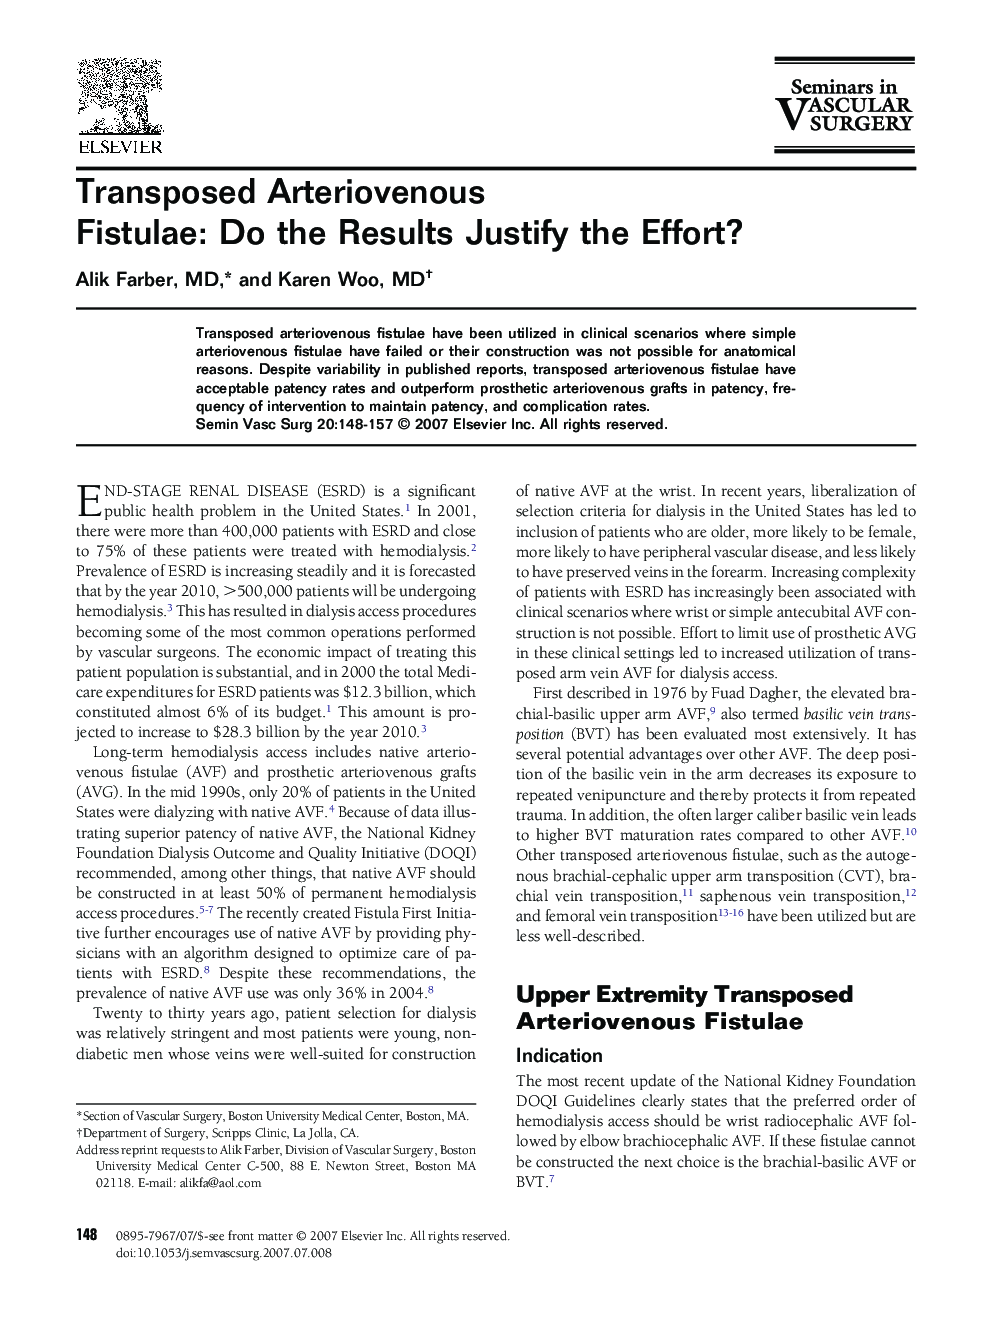 Transposed Arteriovenous Fistulae: Do the Results Justify the Effort?